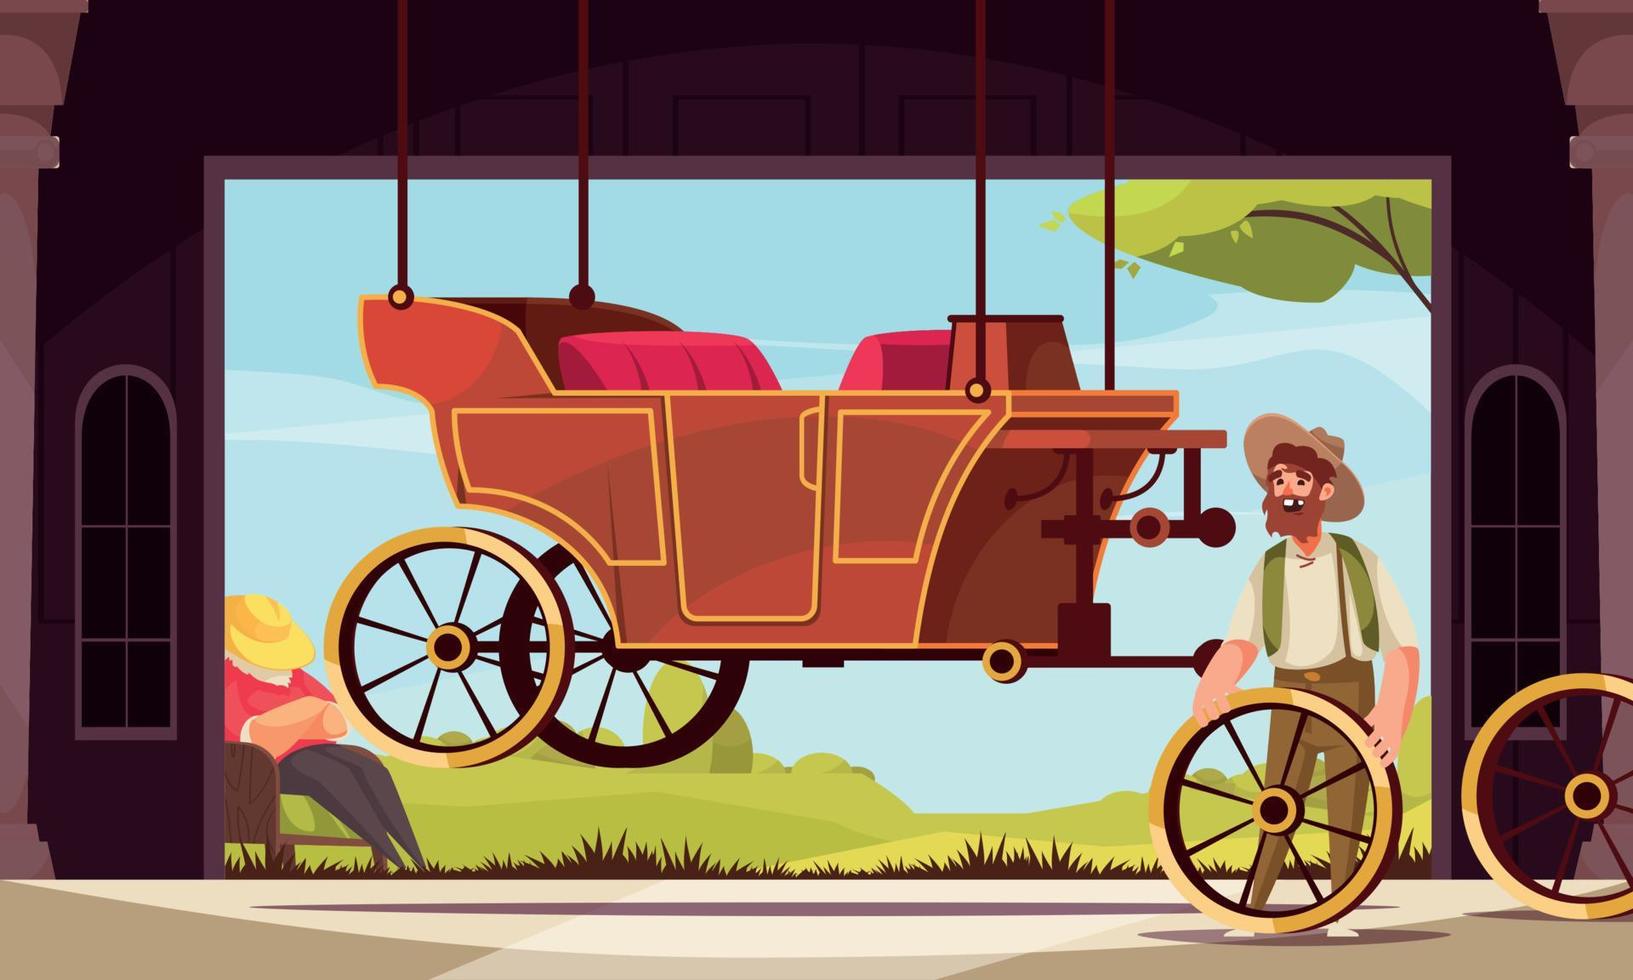 Horse Drawn Vehicle Poster vector